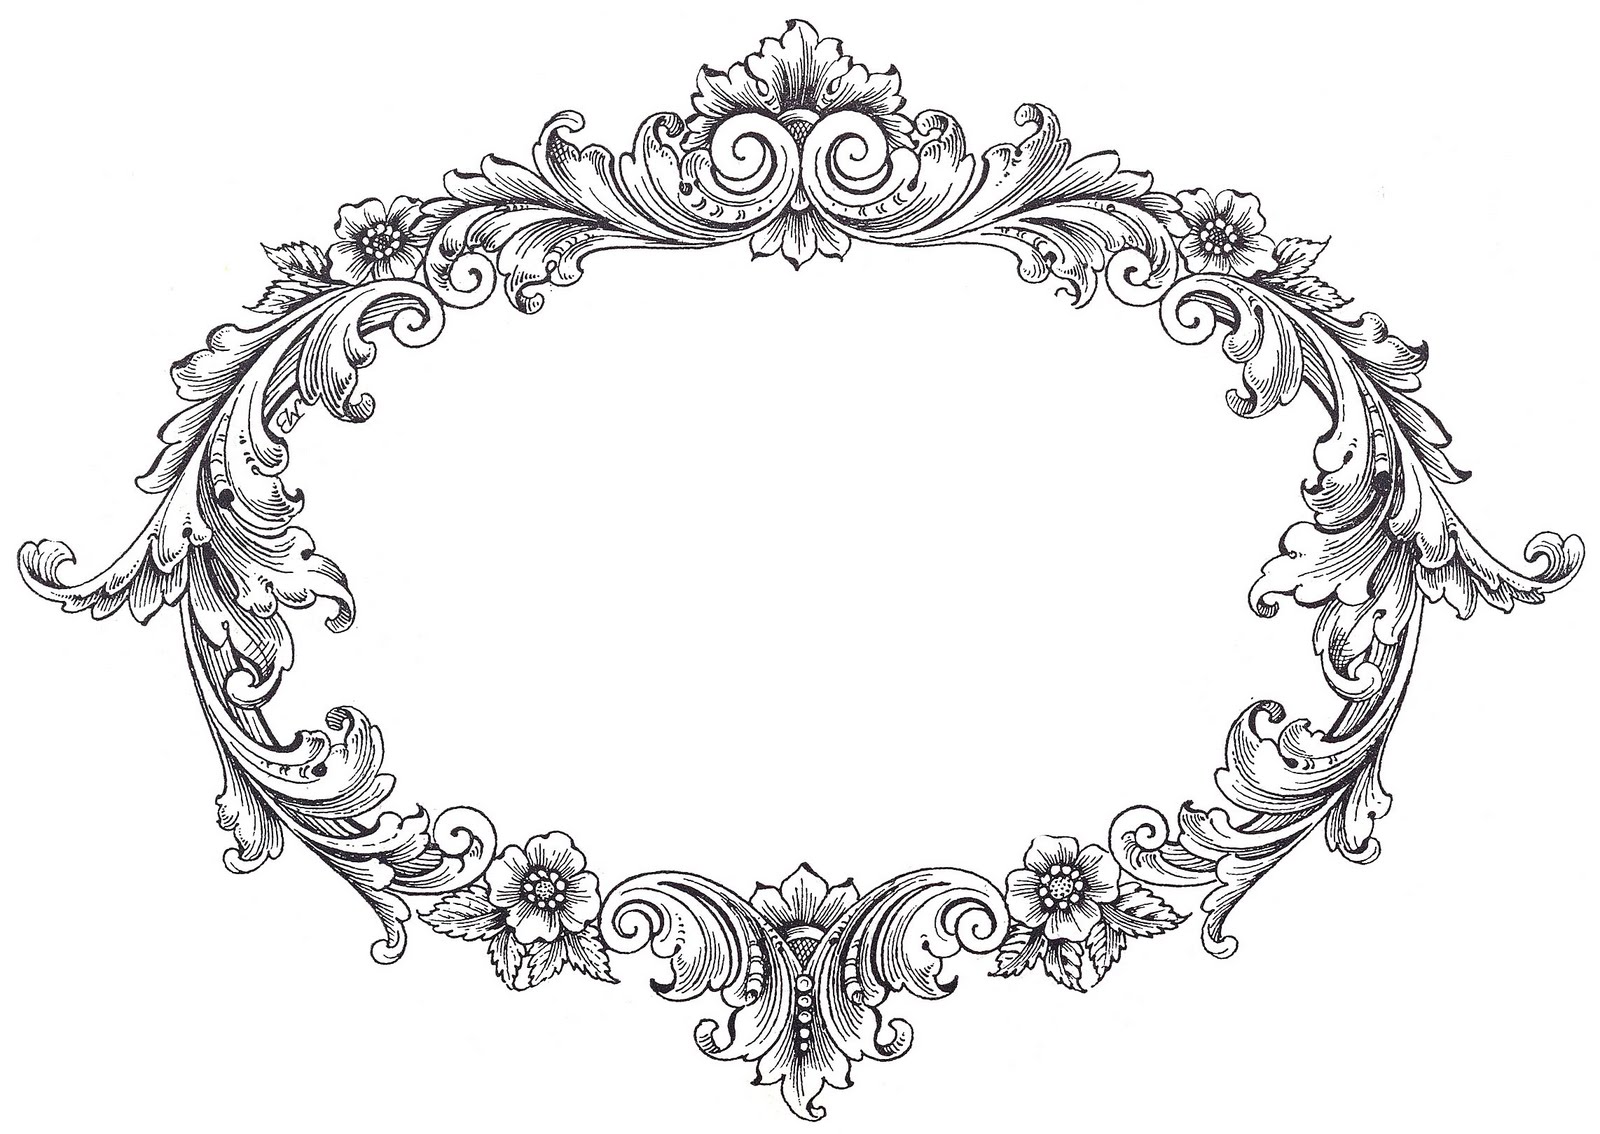 Vintage Clip Art - Fancy Oval Frame - The Graphics Fairy